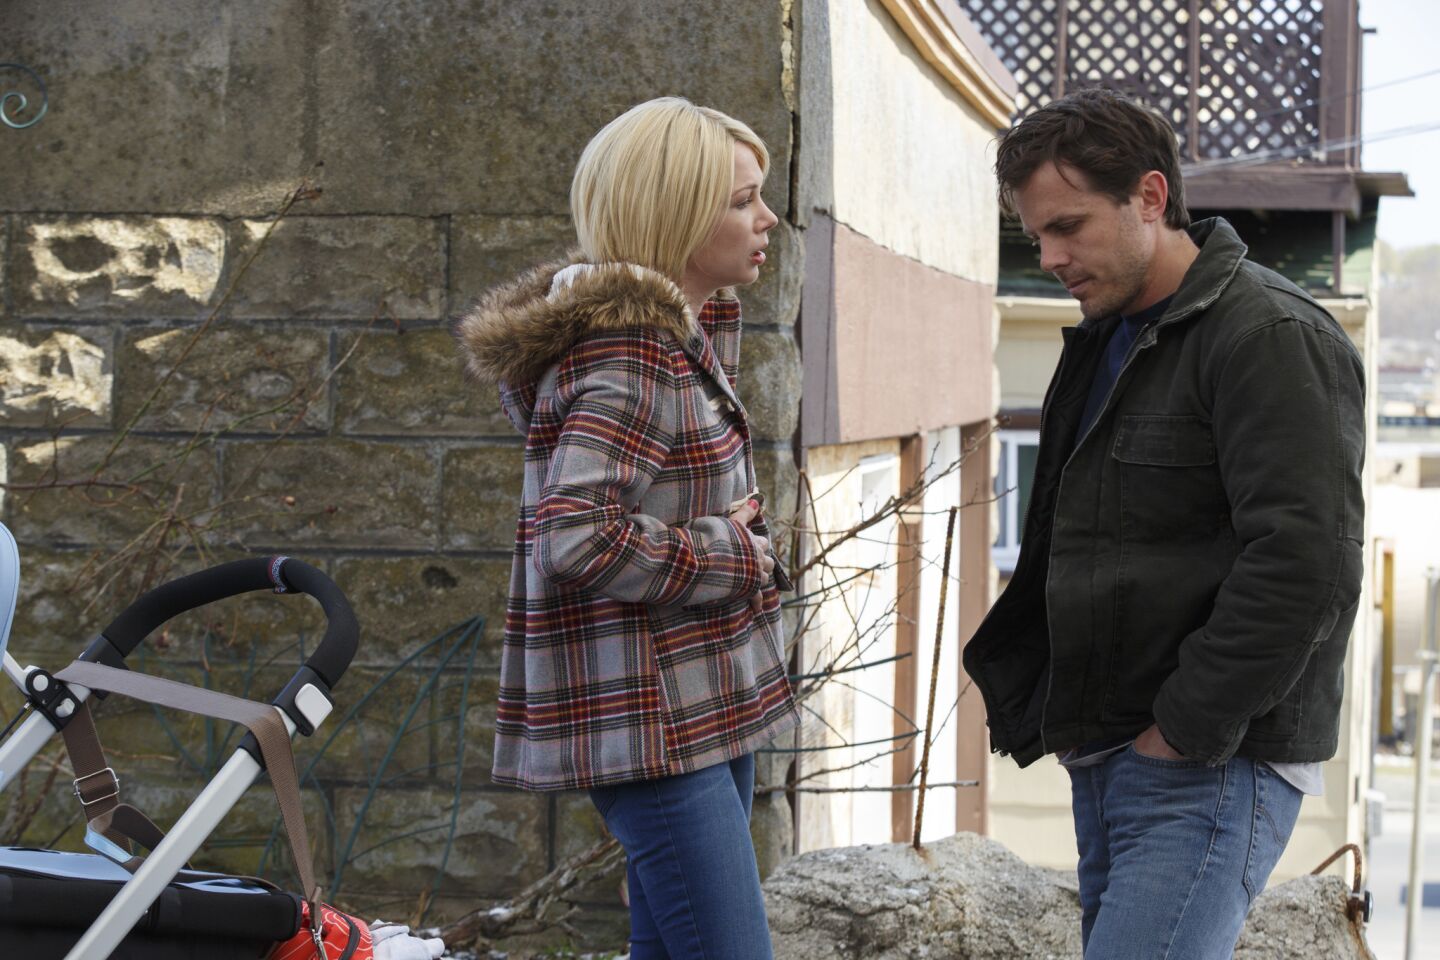 'Manchester by the Sea'